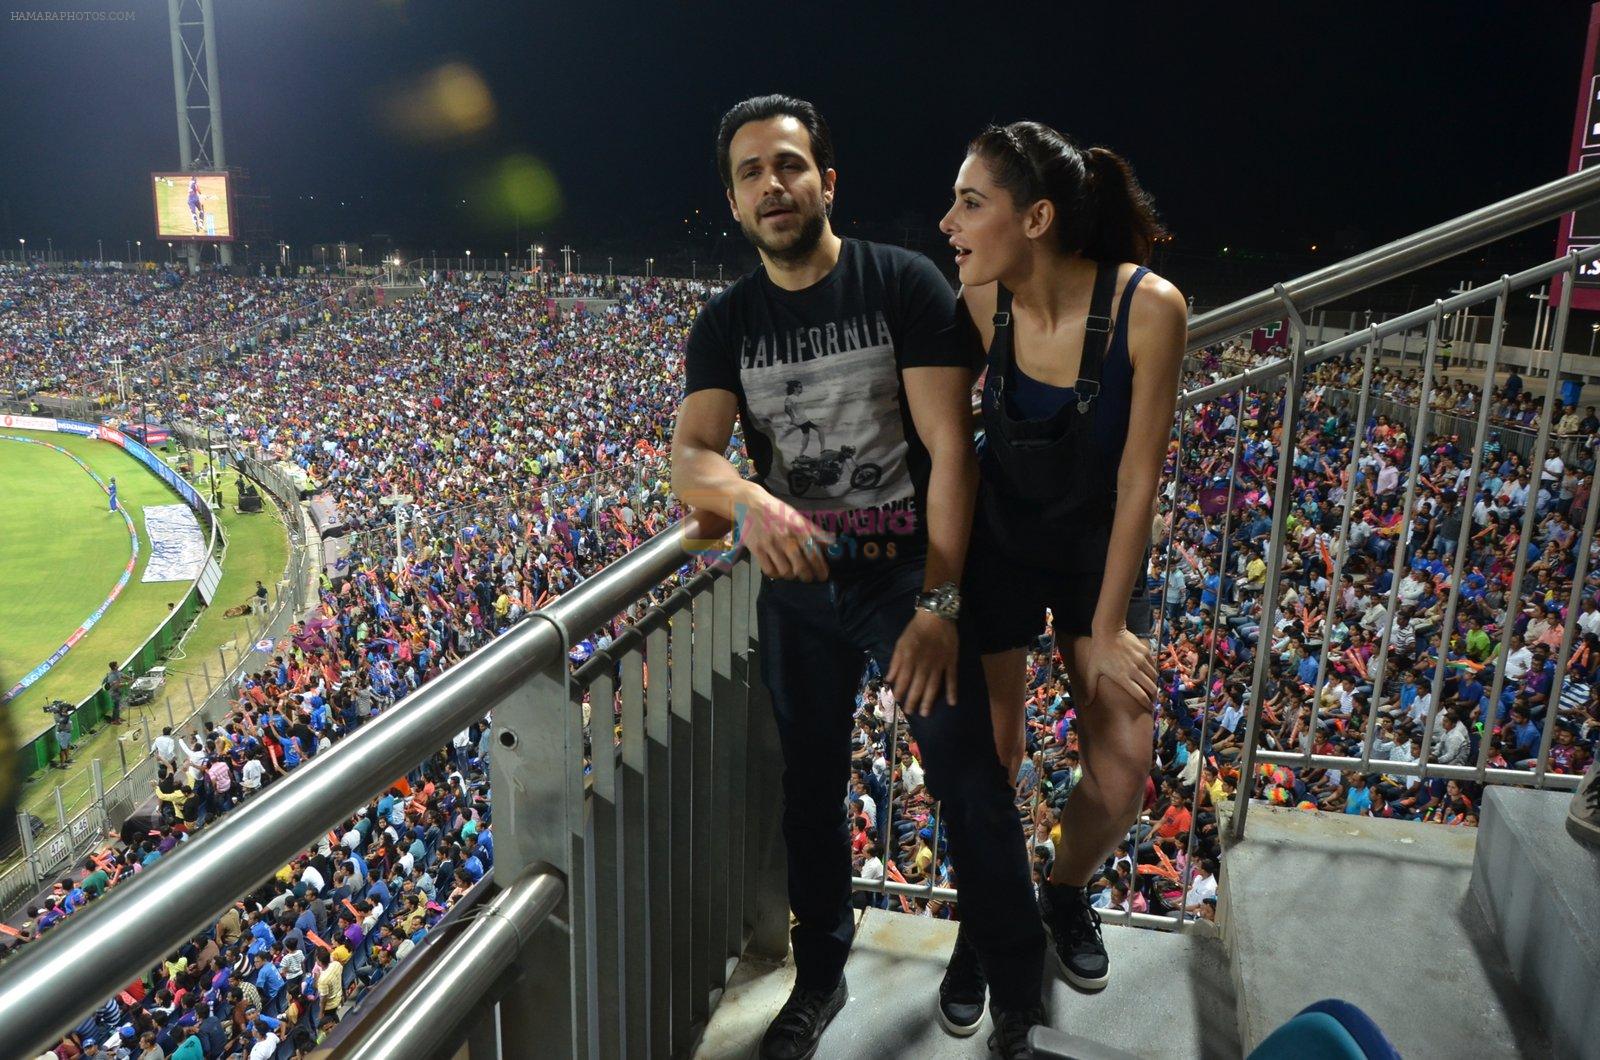 Emraan hashmi and nargis fakhri at Azhar promotions in association with Gourmet Renaissance at IPL match in Pune on 9th May 2016